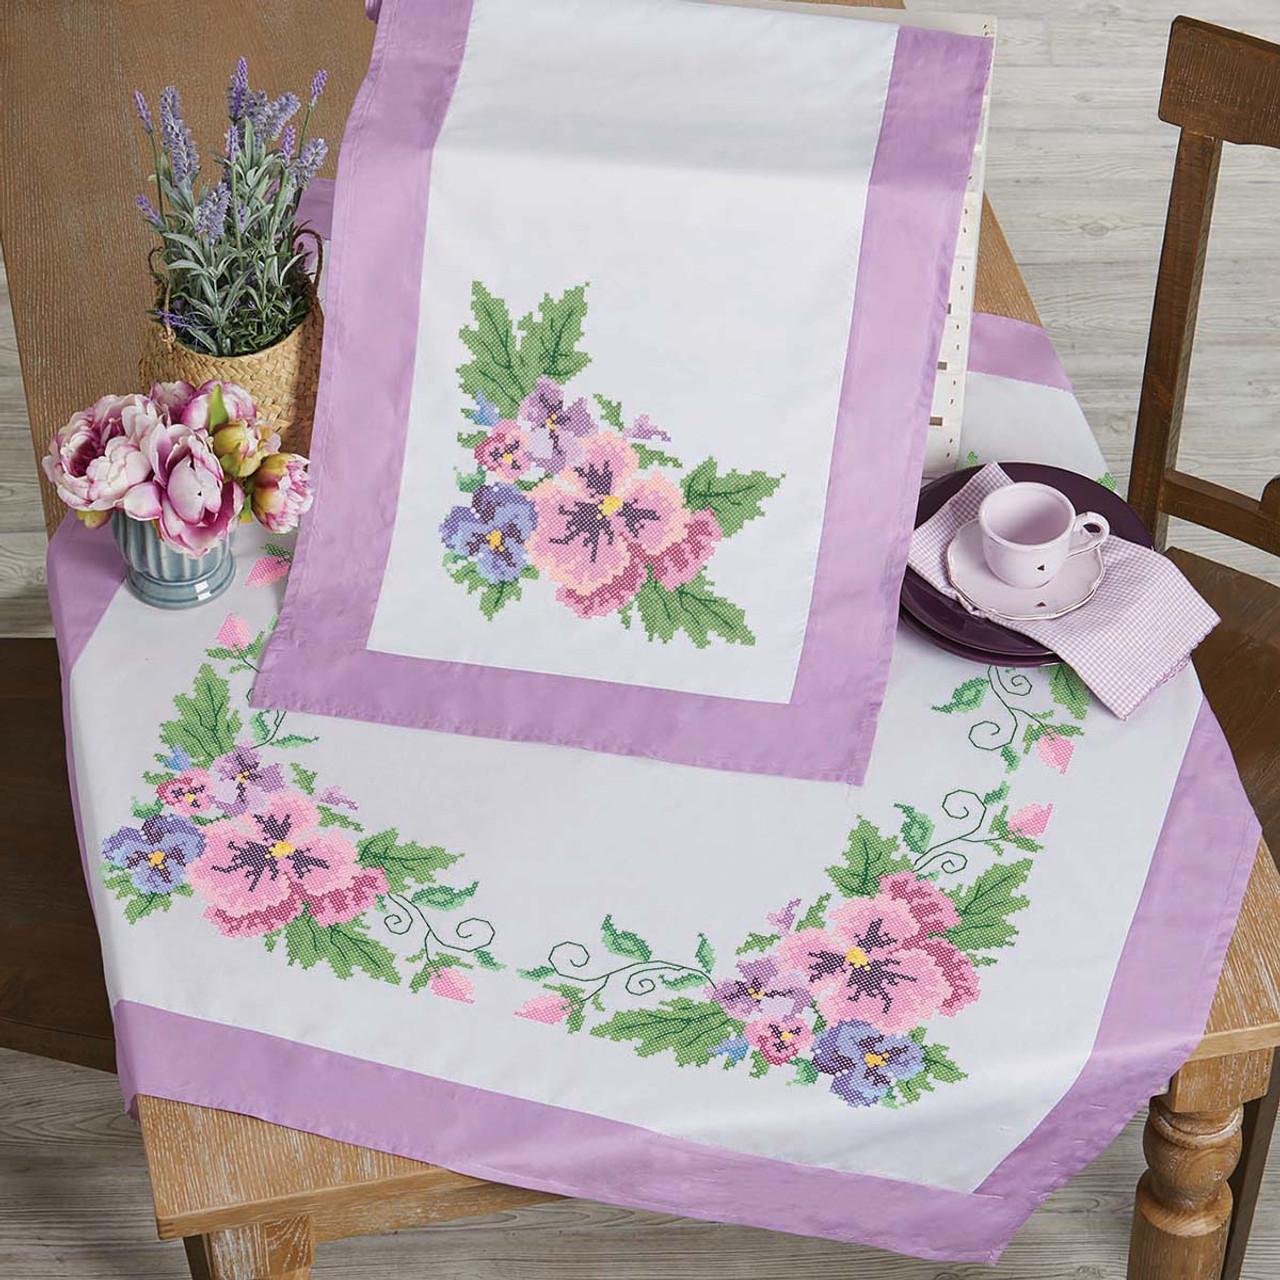 Savannah Baby Quilt Kit - Dimensions - Stamped Cross Stitch Kits at Weekend  Kits